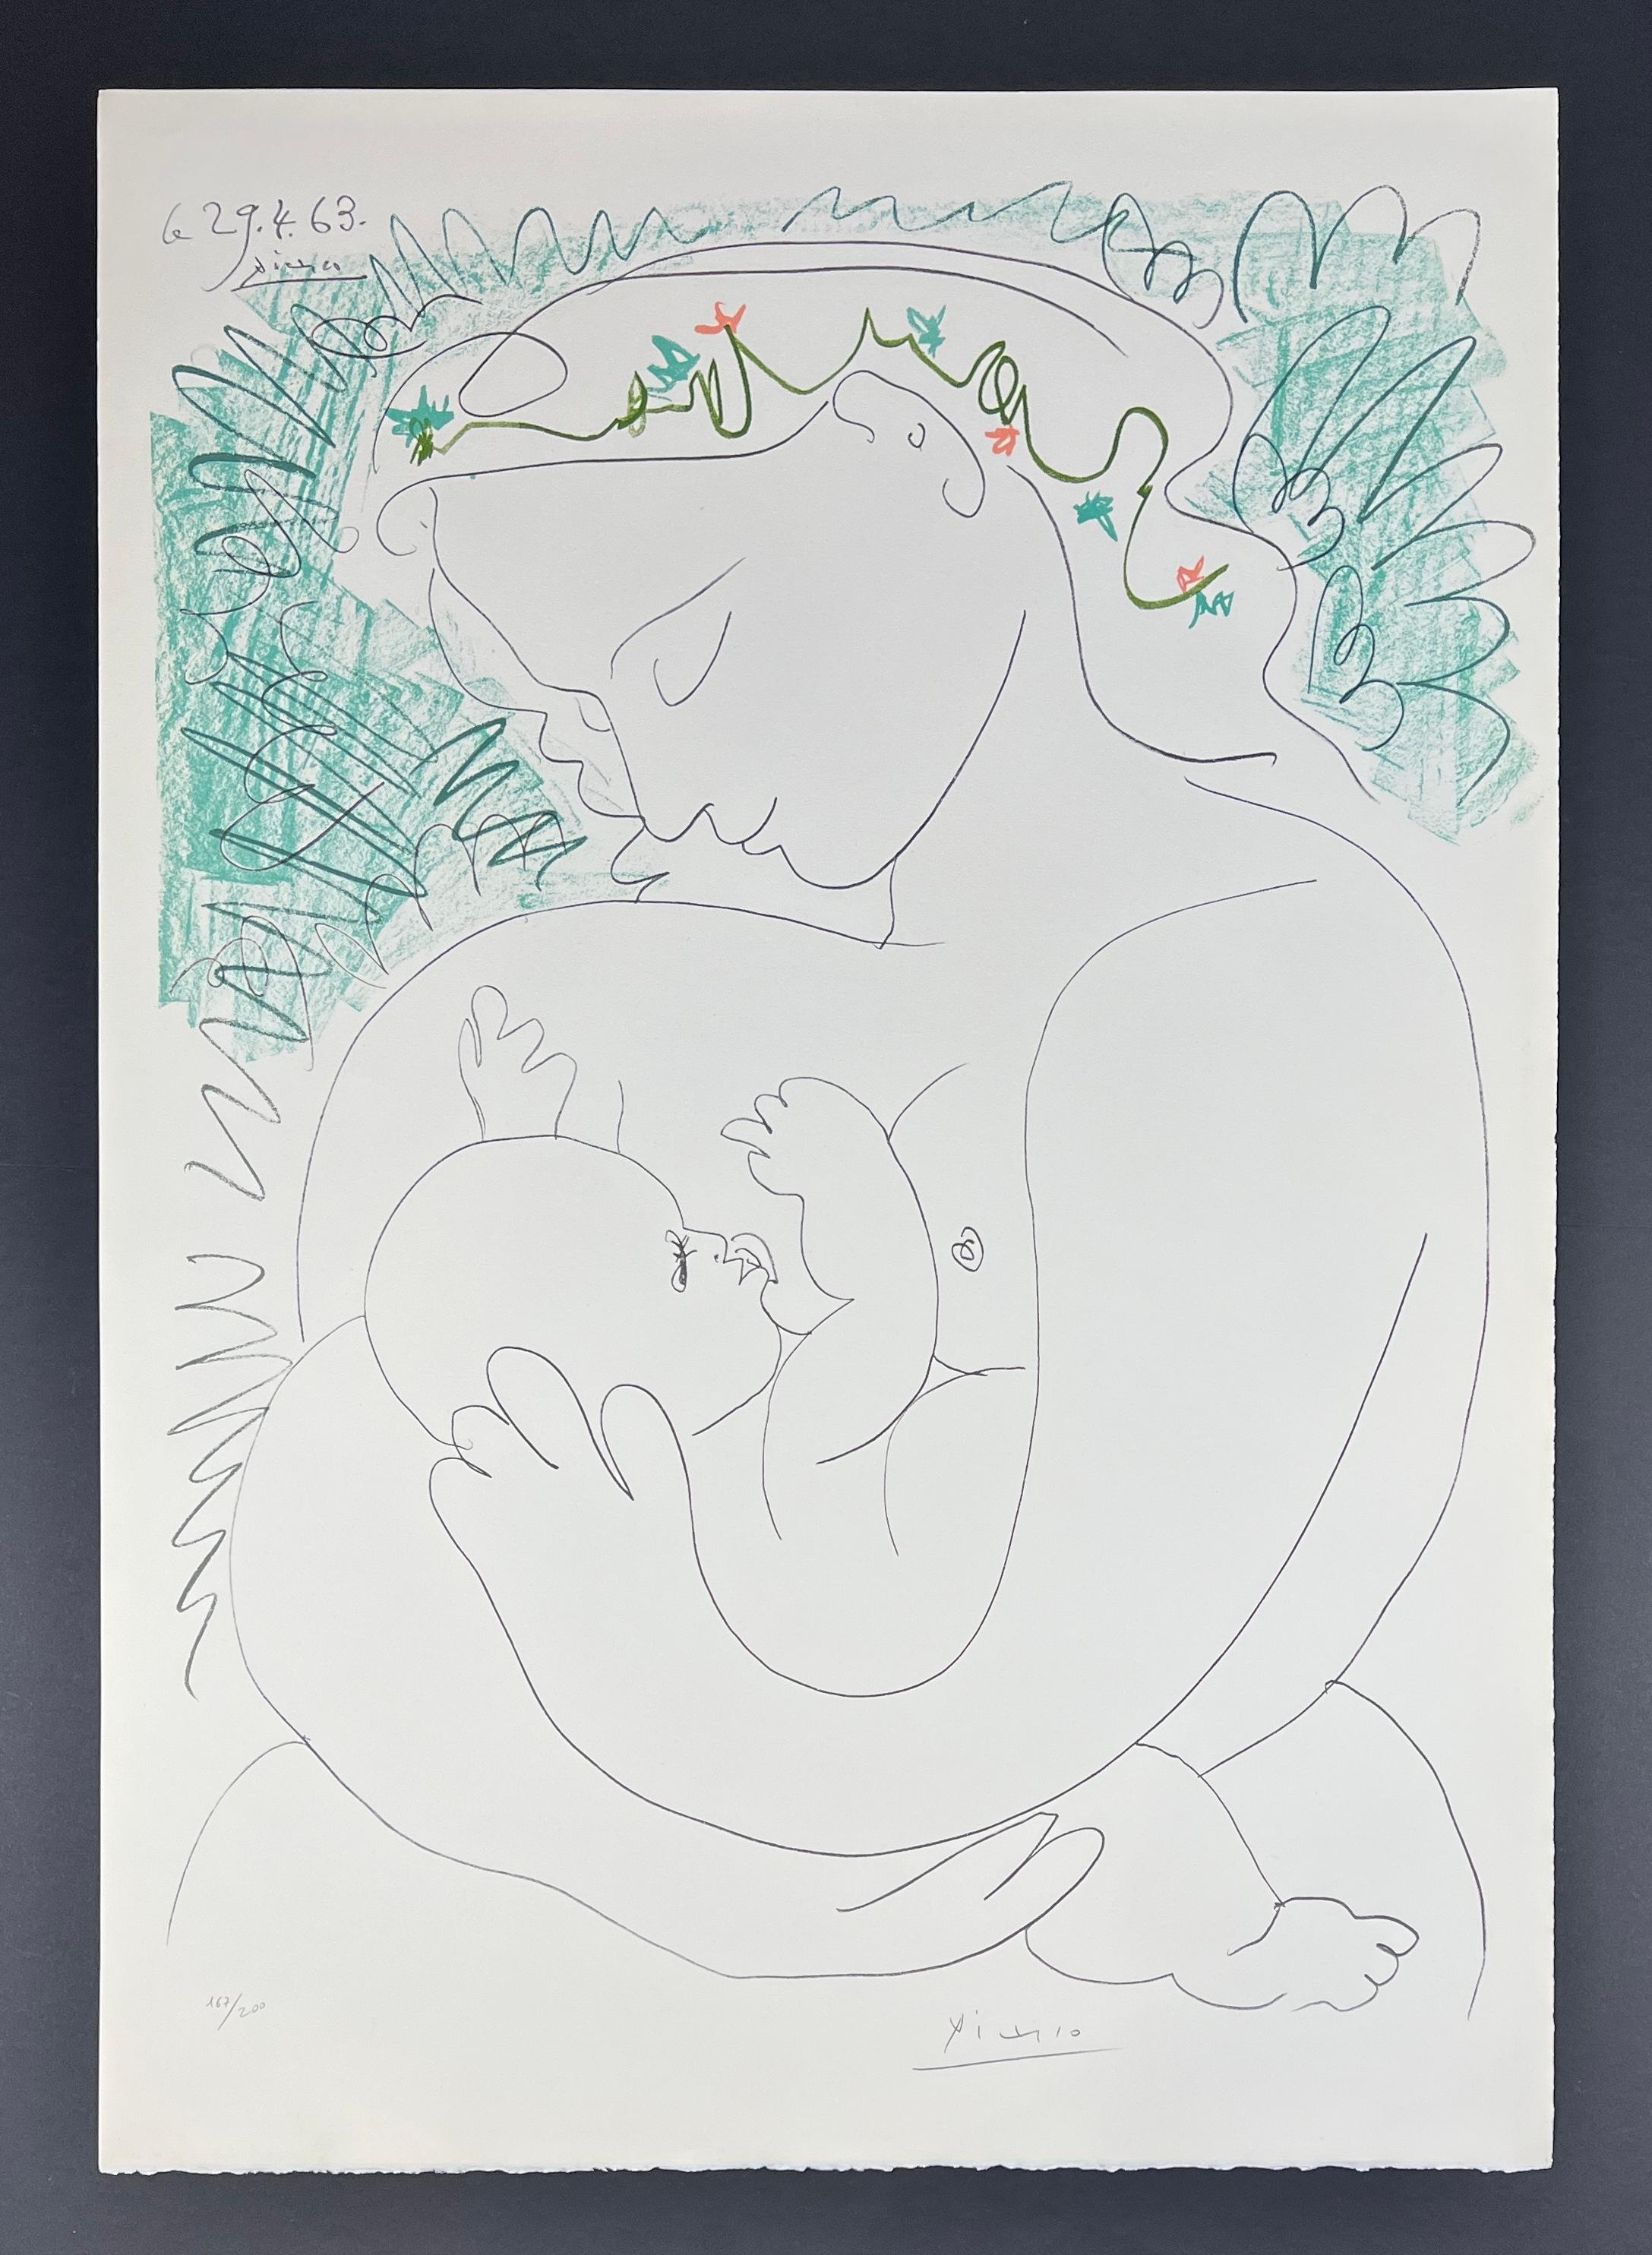 Pablo Picasso ( 1881 – 1973 ) – hand-signed lithograph on Arches - 1963